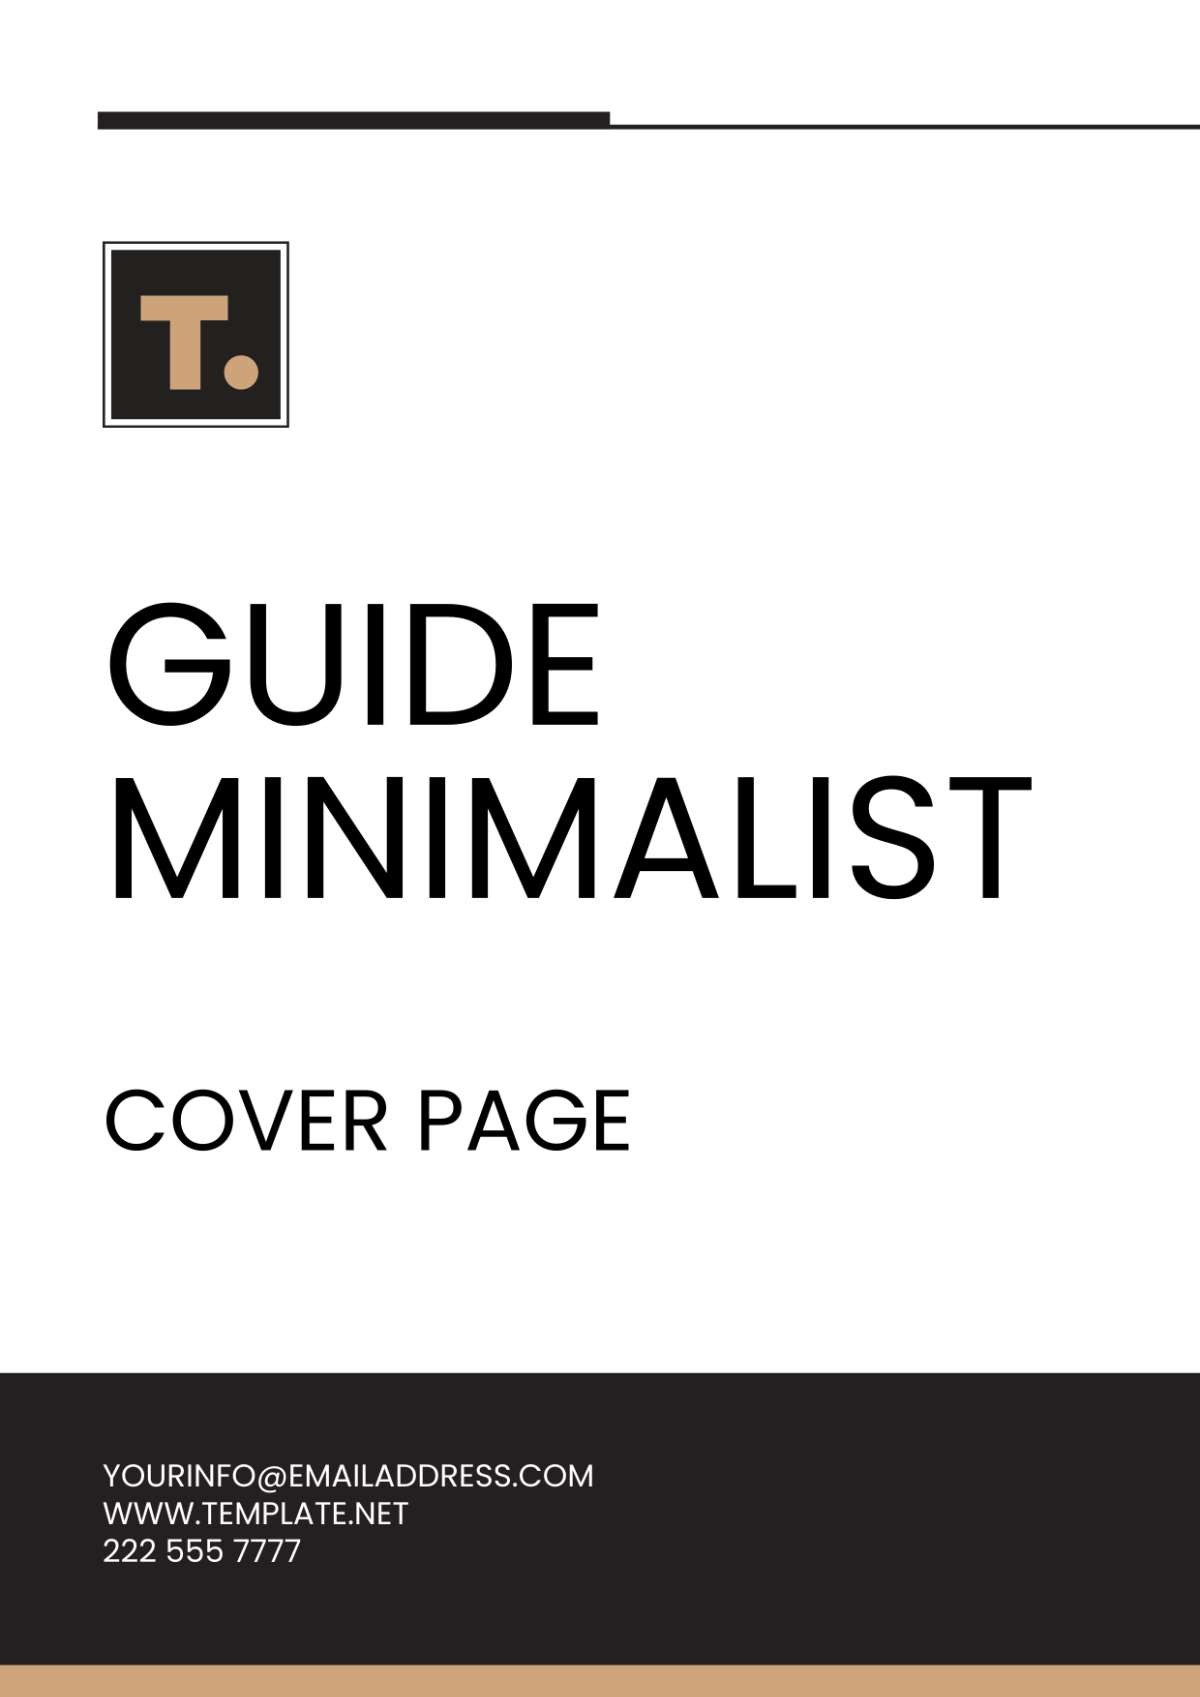 Free Guide Minimalist Cover Page Template